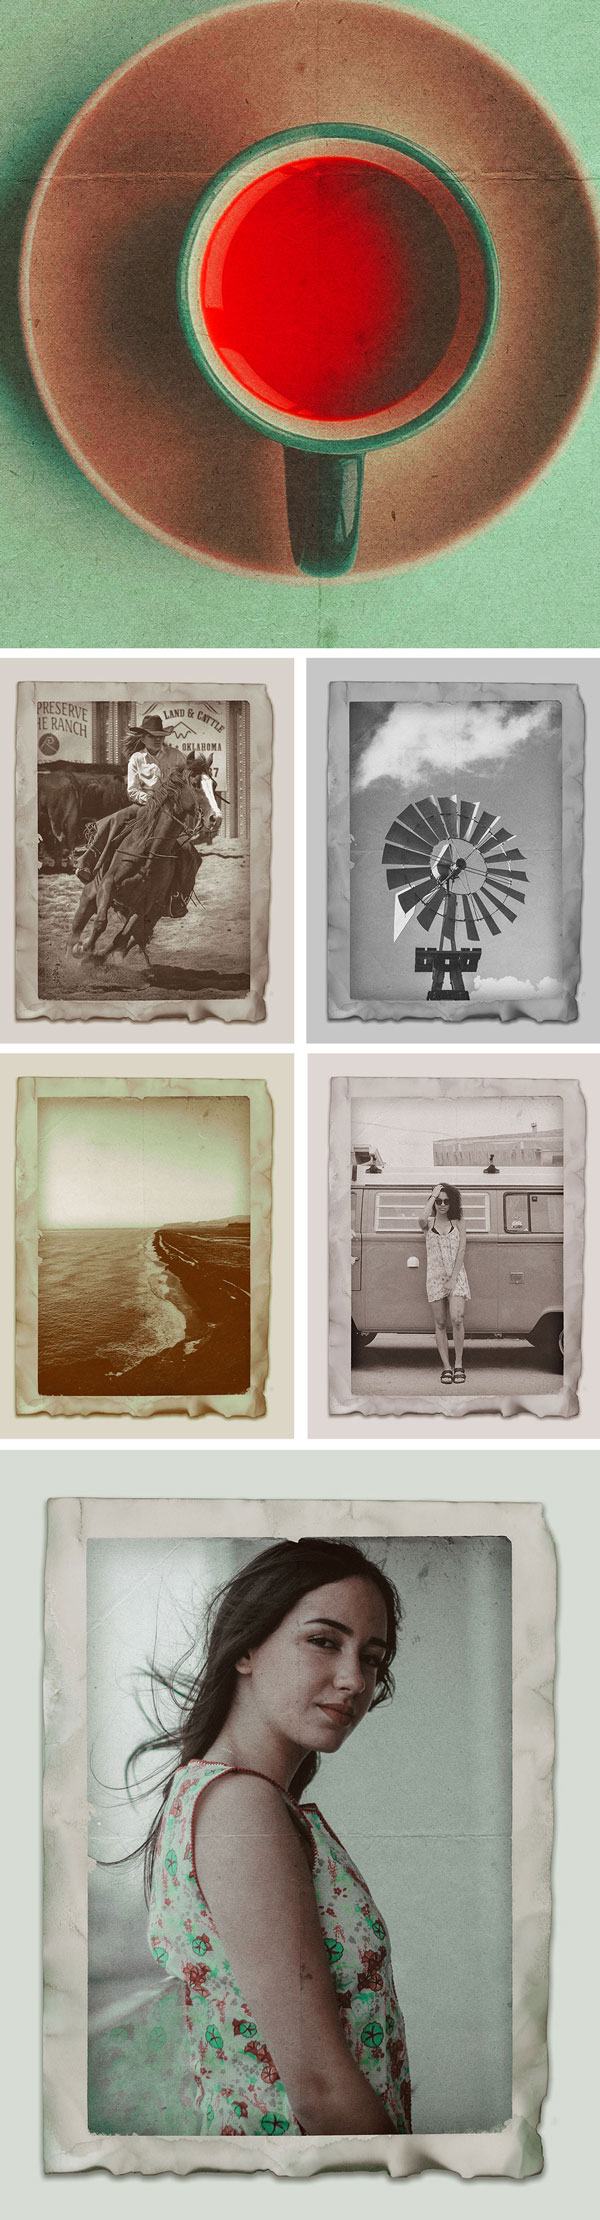 Free Vintage Photo Effects PSD